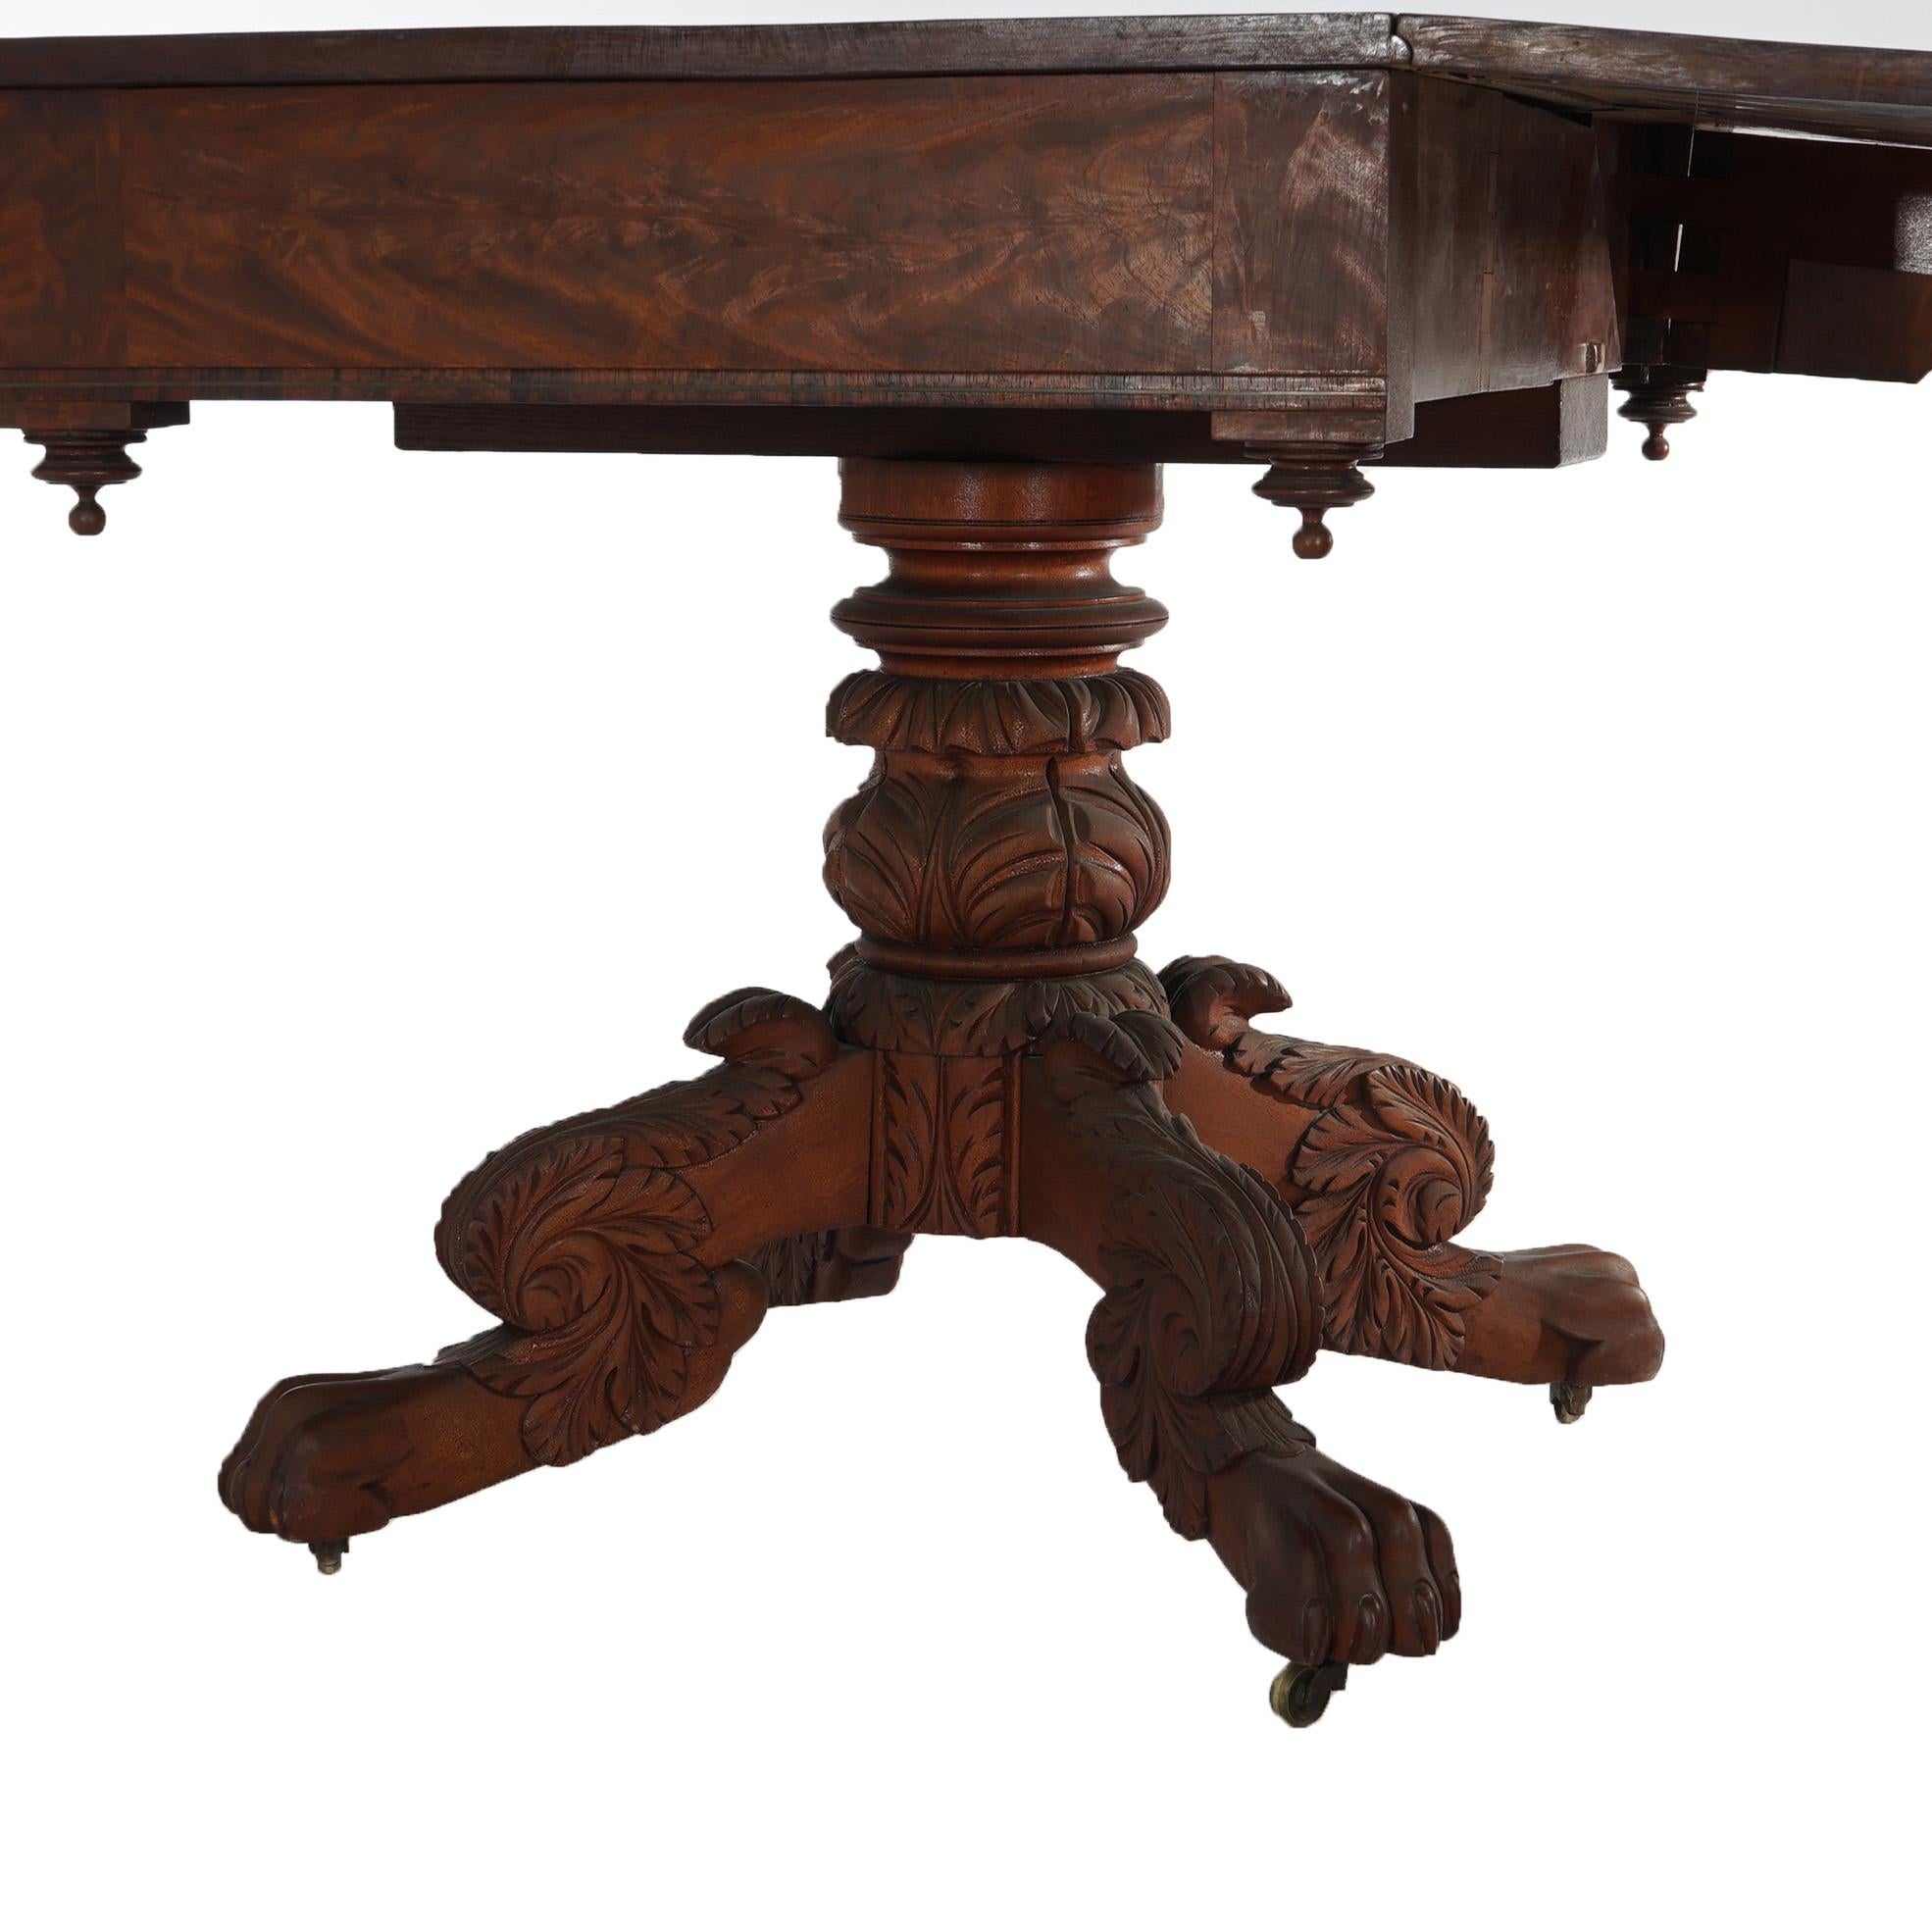 Antique Neoclassical American Empire Carved Flame Mahogany Drop Leaf Table c1880 For Sale 8